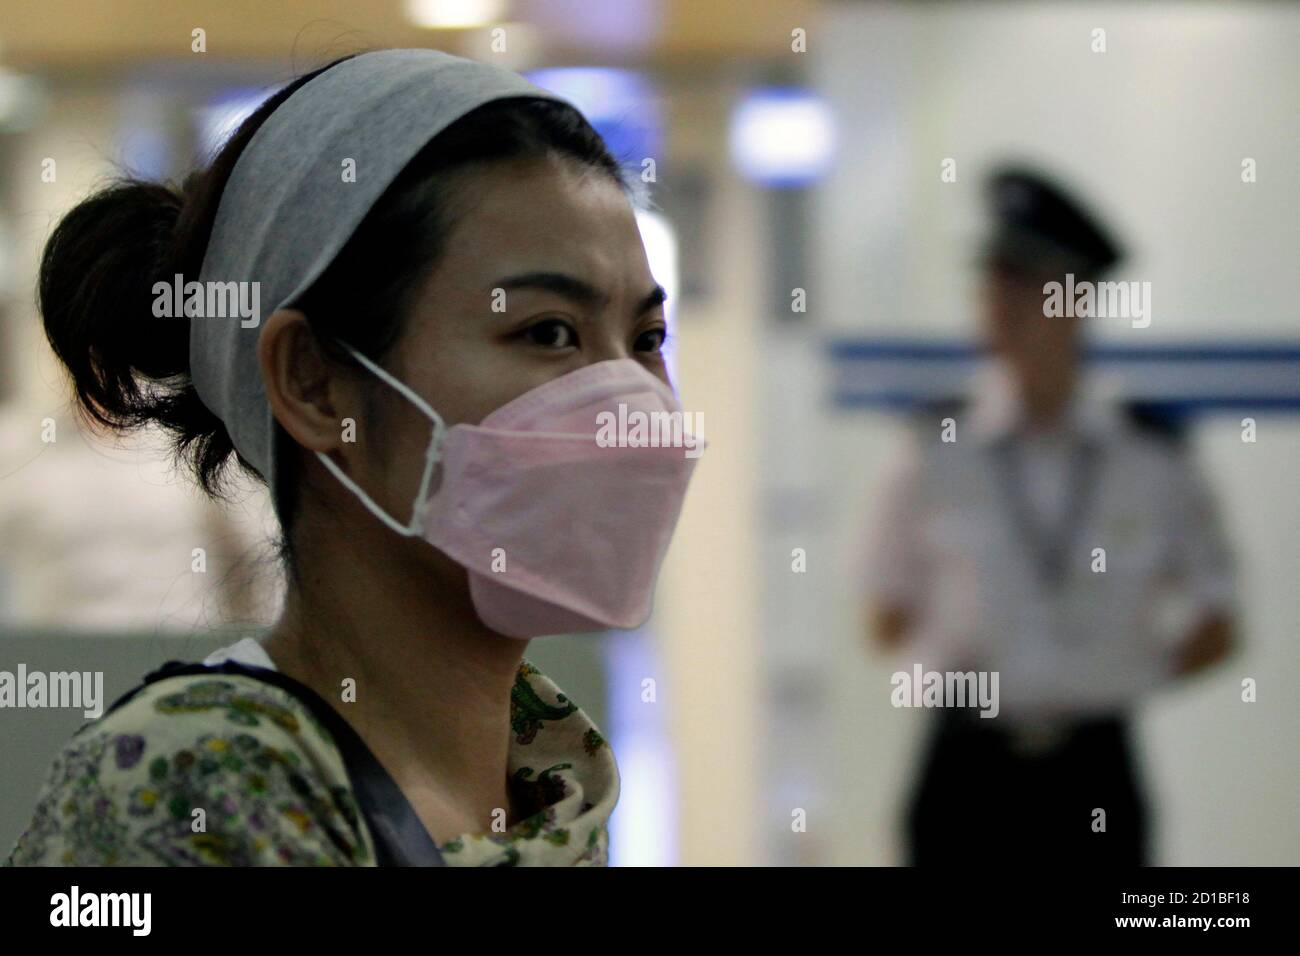 A passenger wearing protective mask arrives at Shanghai Pudong Airport June 12, 2009. The World Health Organization declared an influenza pandemic on Thursday and advised governments to prepare for a long-term battle against an unstoppable new flu virus. REUTERS/Aly Song (CHINA SOCIETY HEALTH) Stock Photo